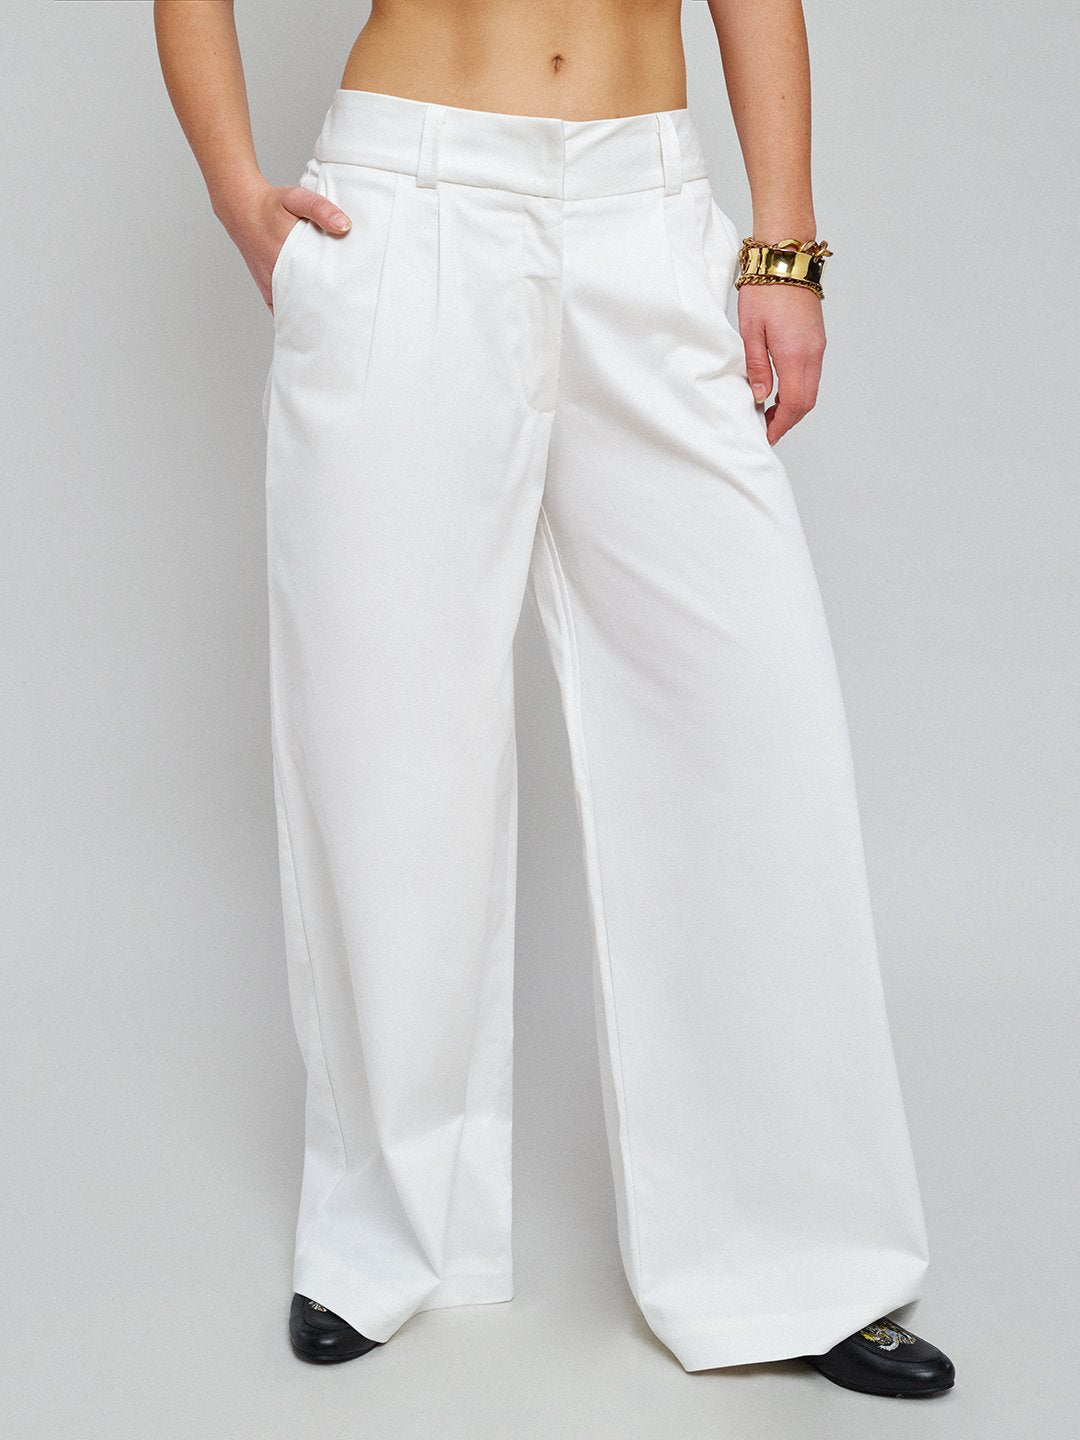 The Pantaloon Trousers - AMILLI at LabelRow